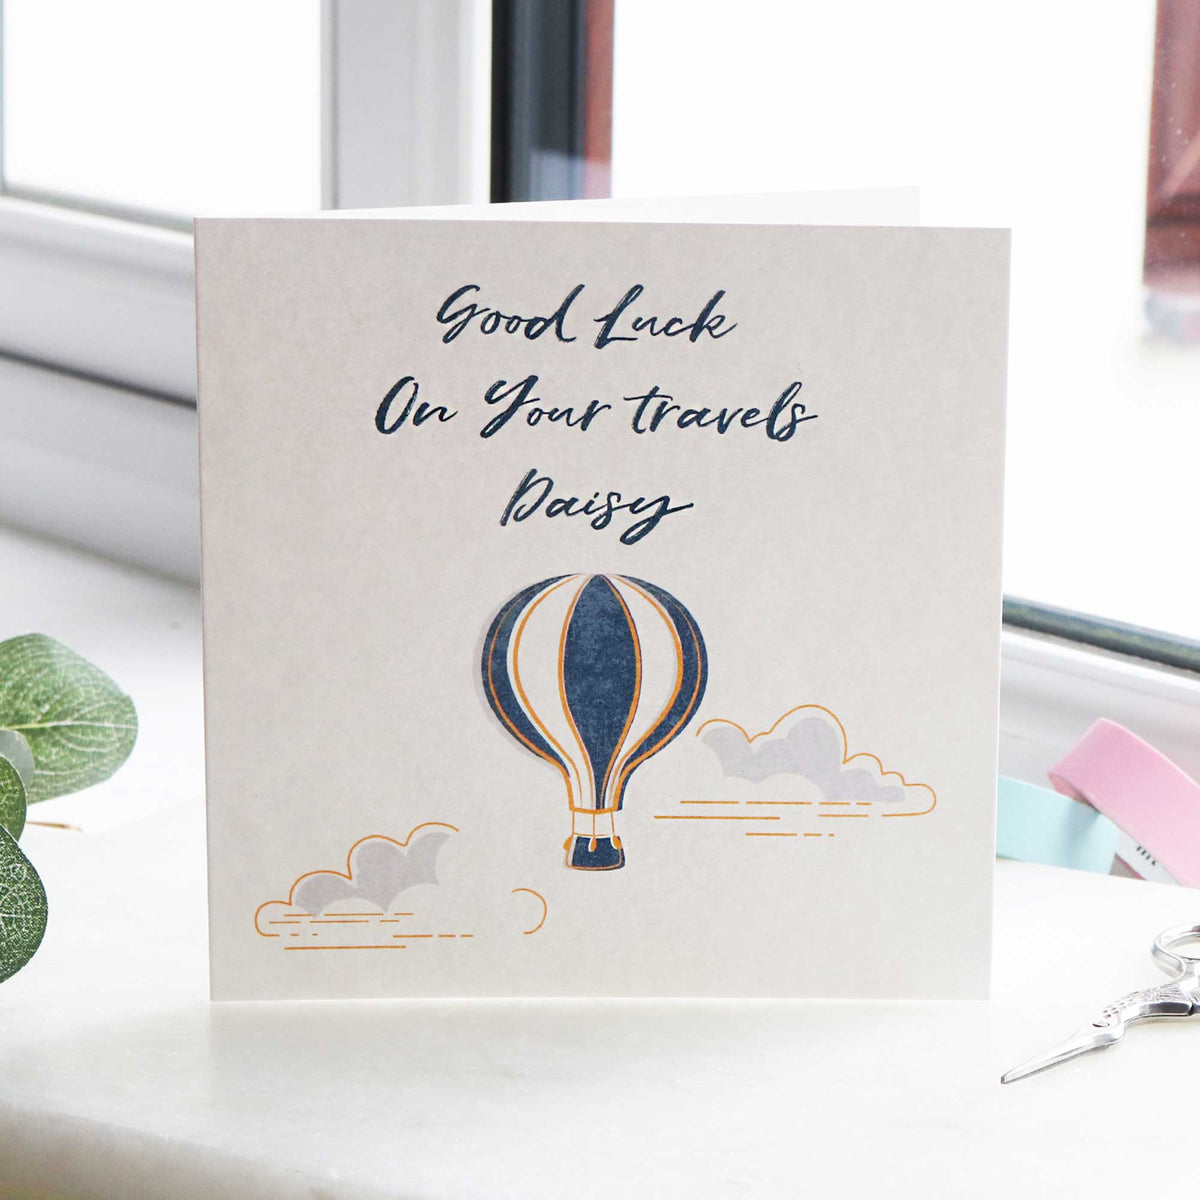 Personalised good luck on your travels gift card off the map jewellery brighton uk